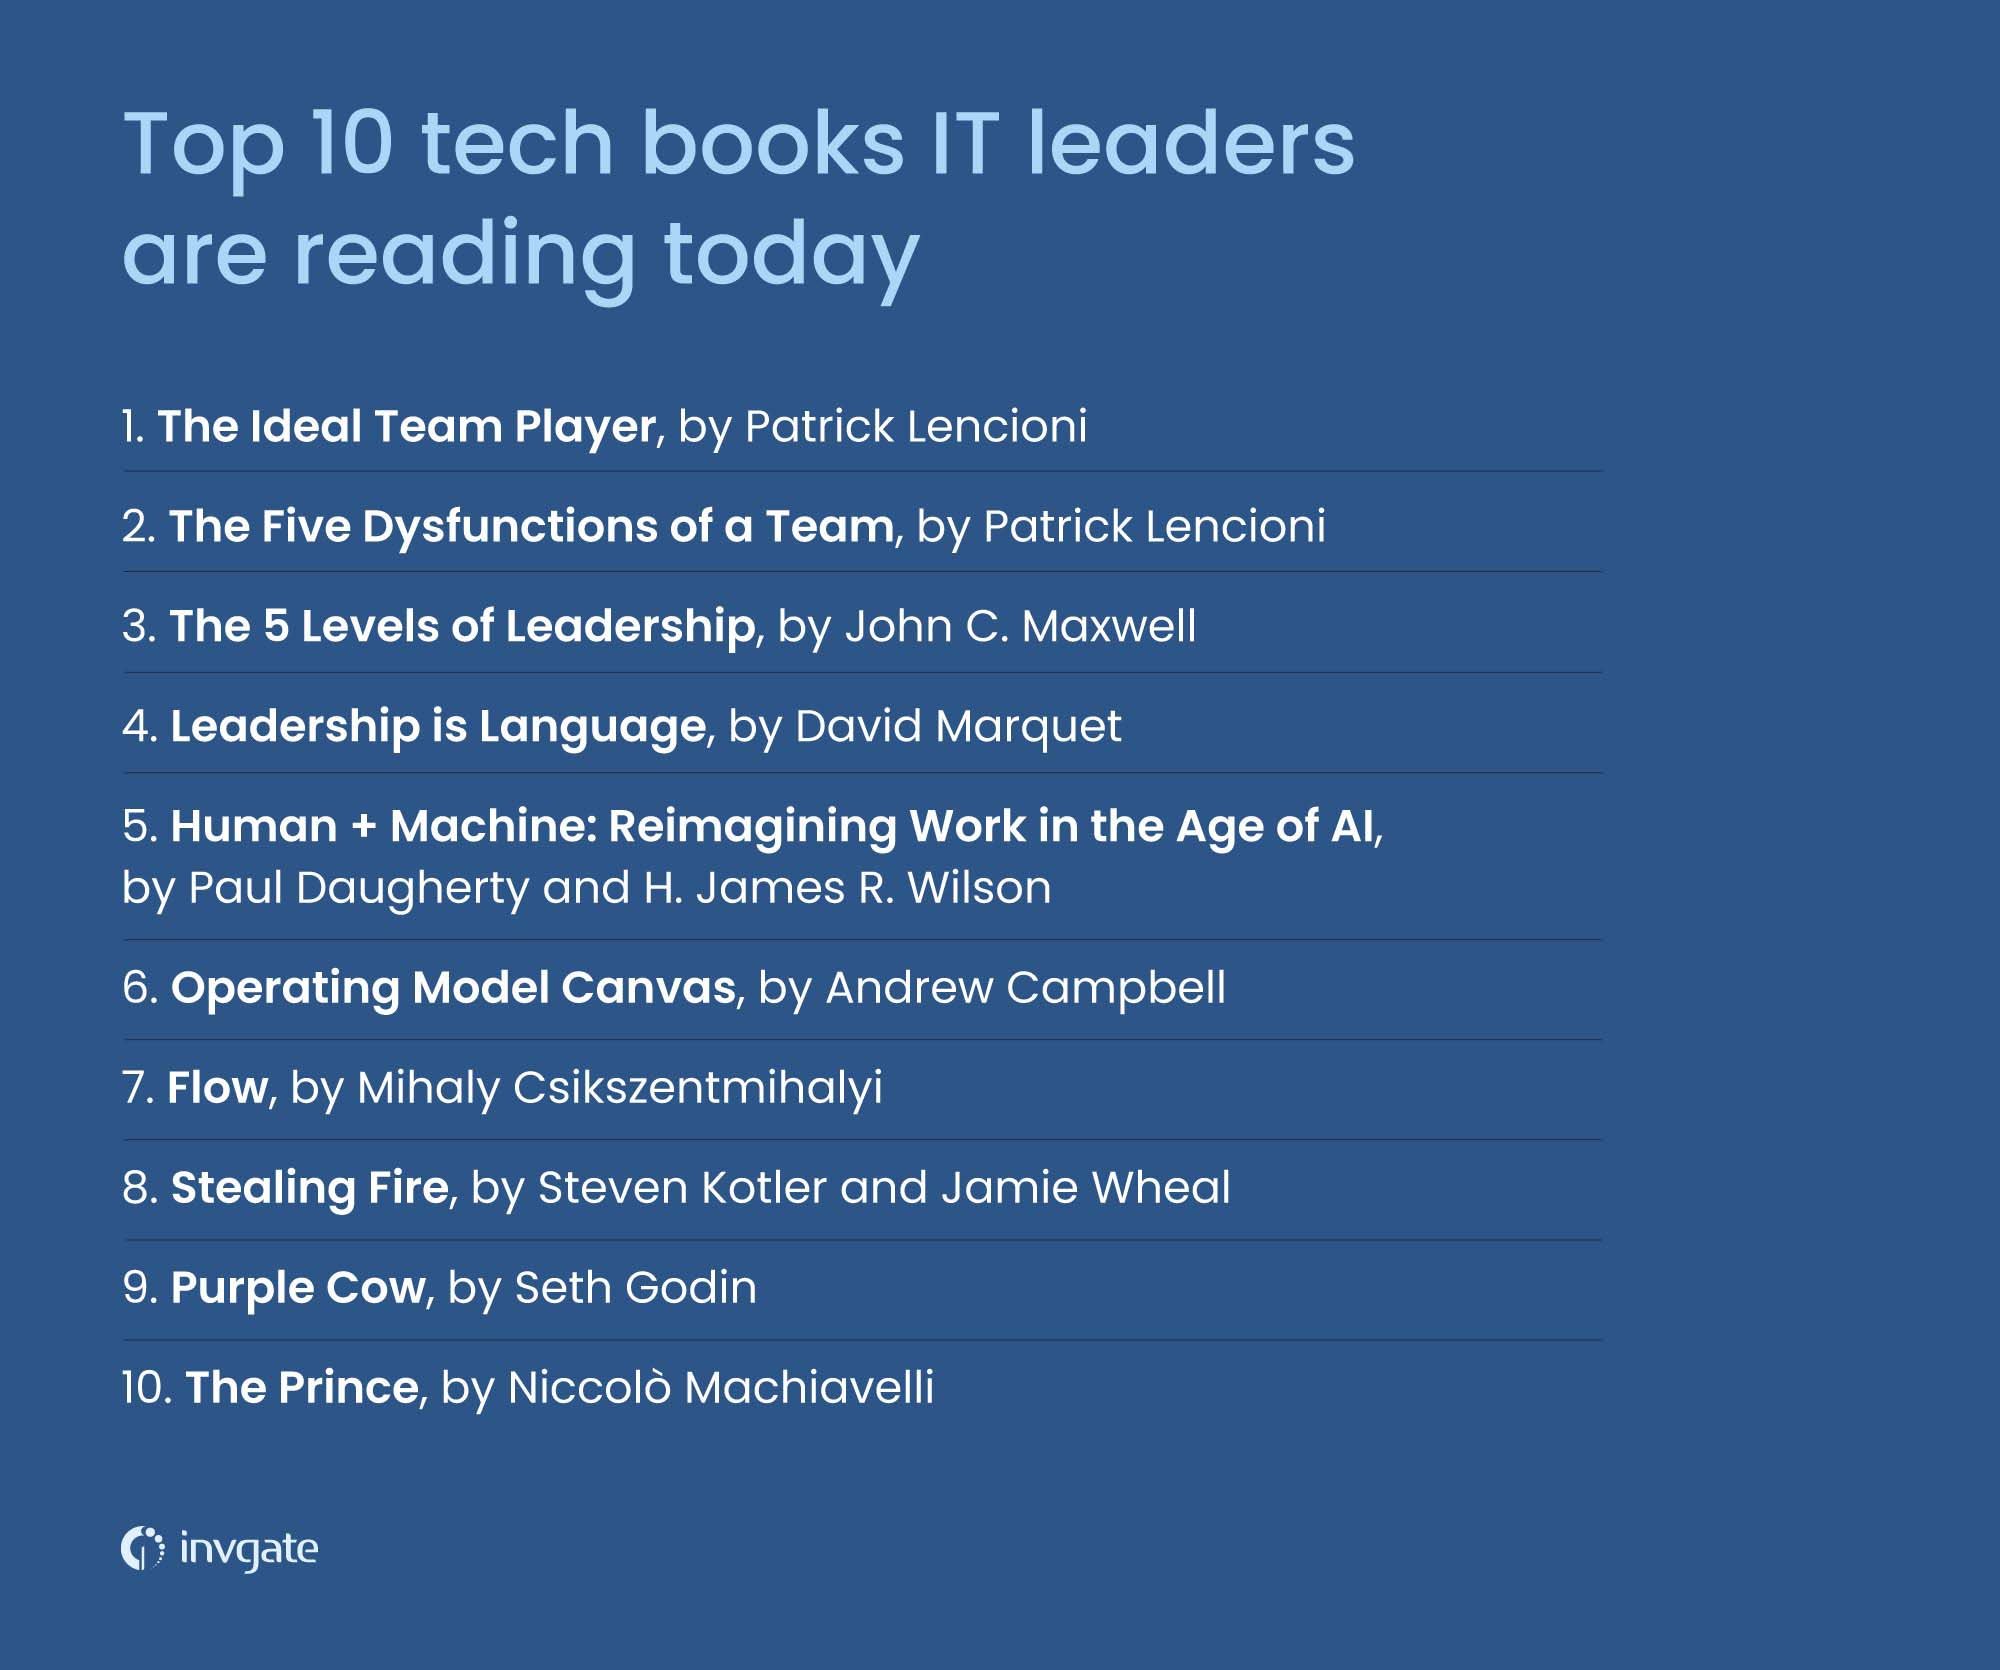 Top 10 tech books IT leaders are reading today, based on the recommendations made by Ticket Volume's guests.